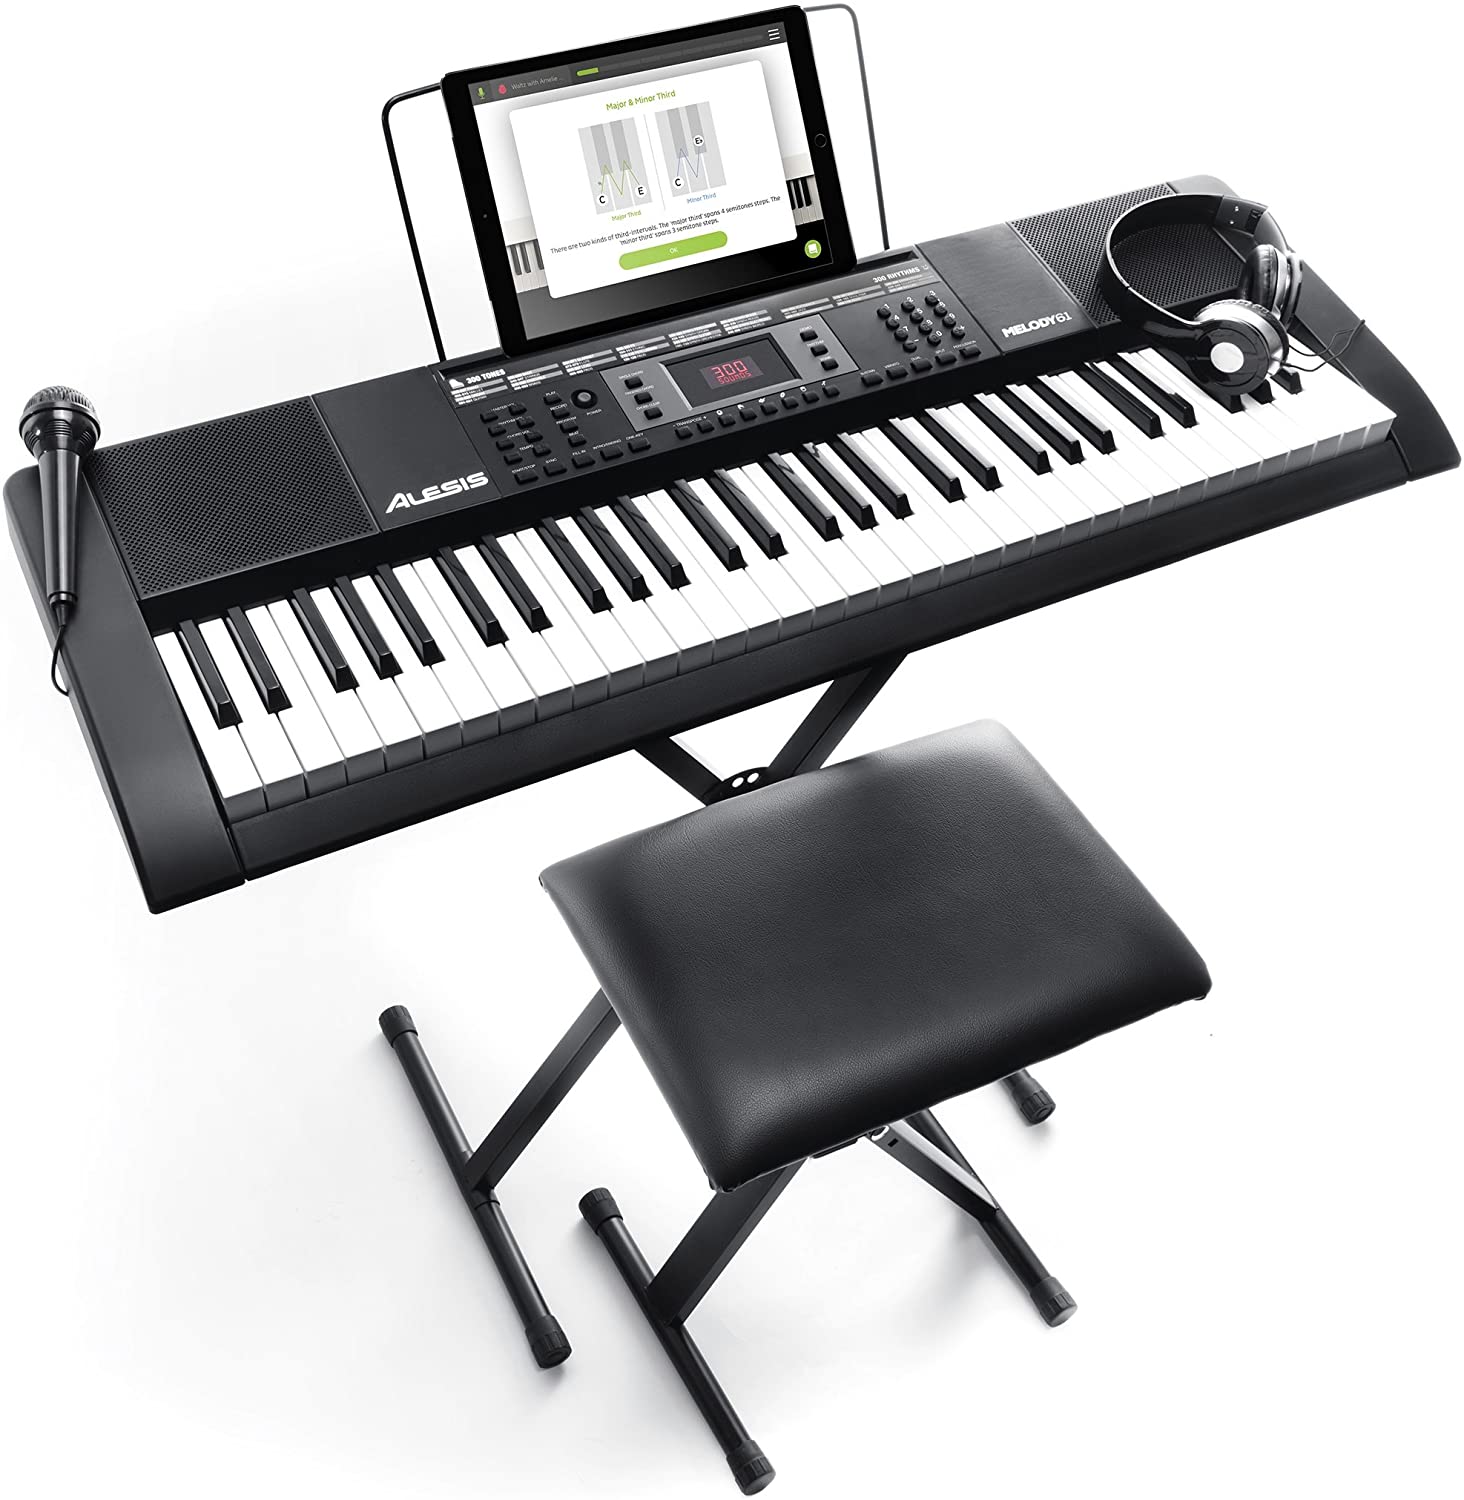 Review of Alesis Melody 61 MKII | 61 Key Portable Keyboard Piano with Built In Speakers, Headphones, Microphone